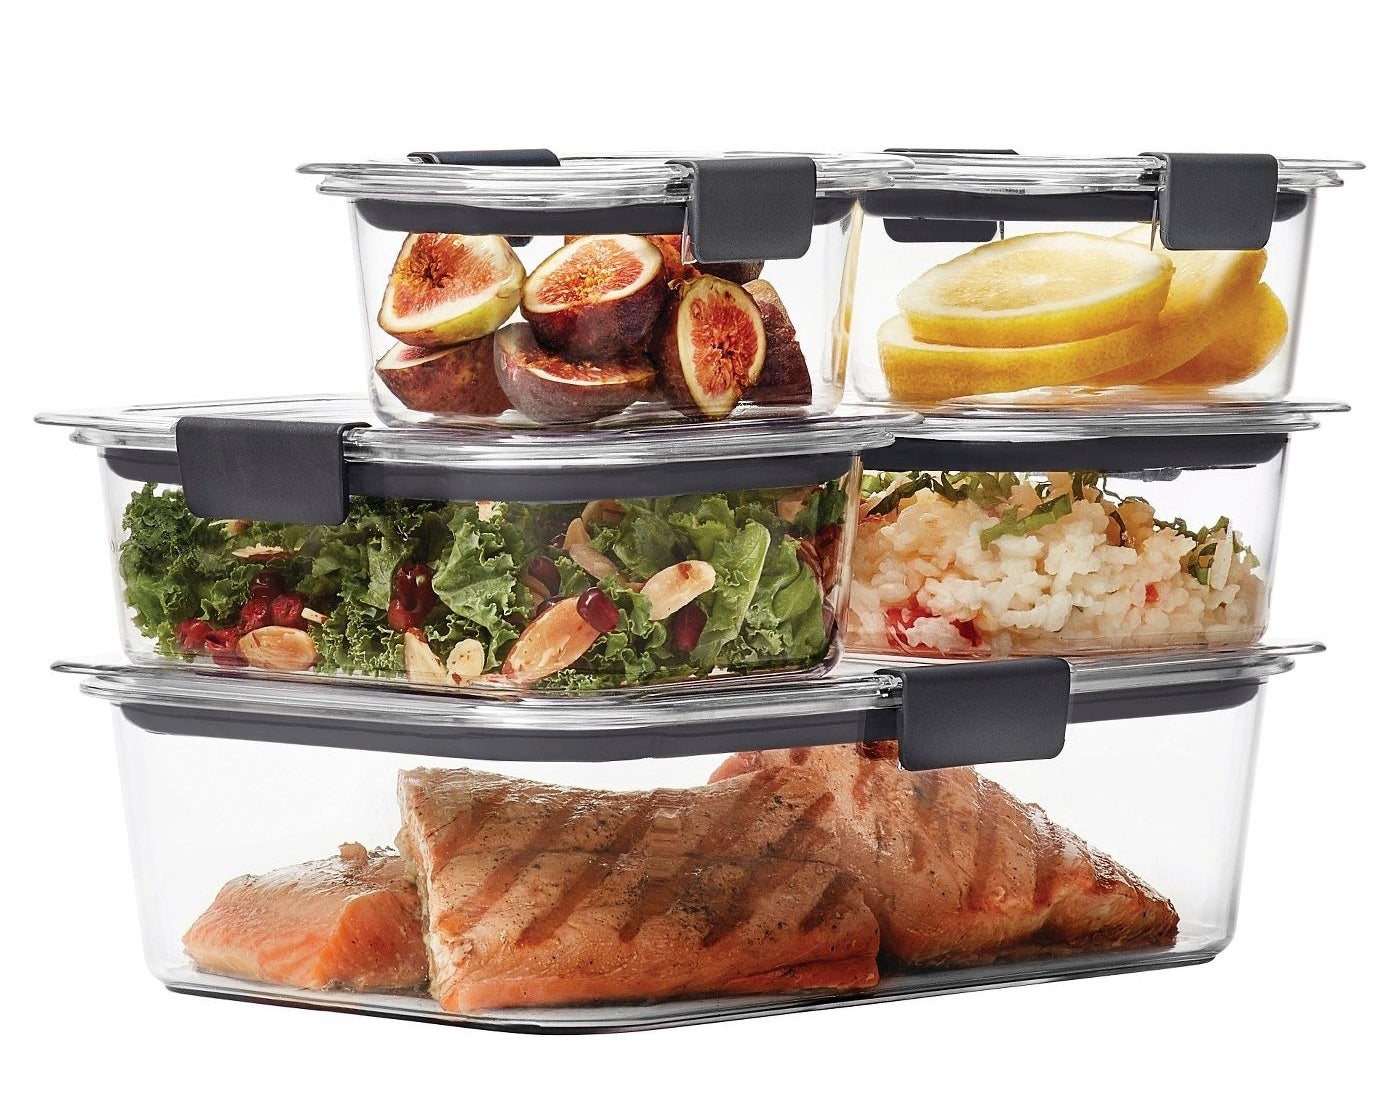 The food storage containers